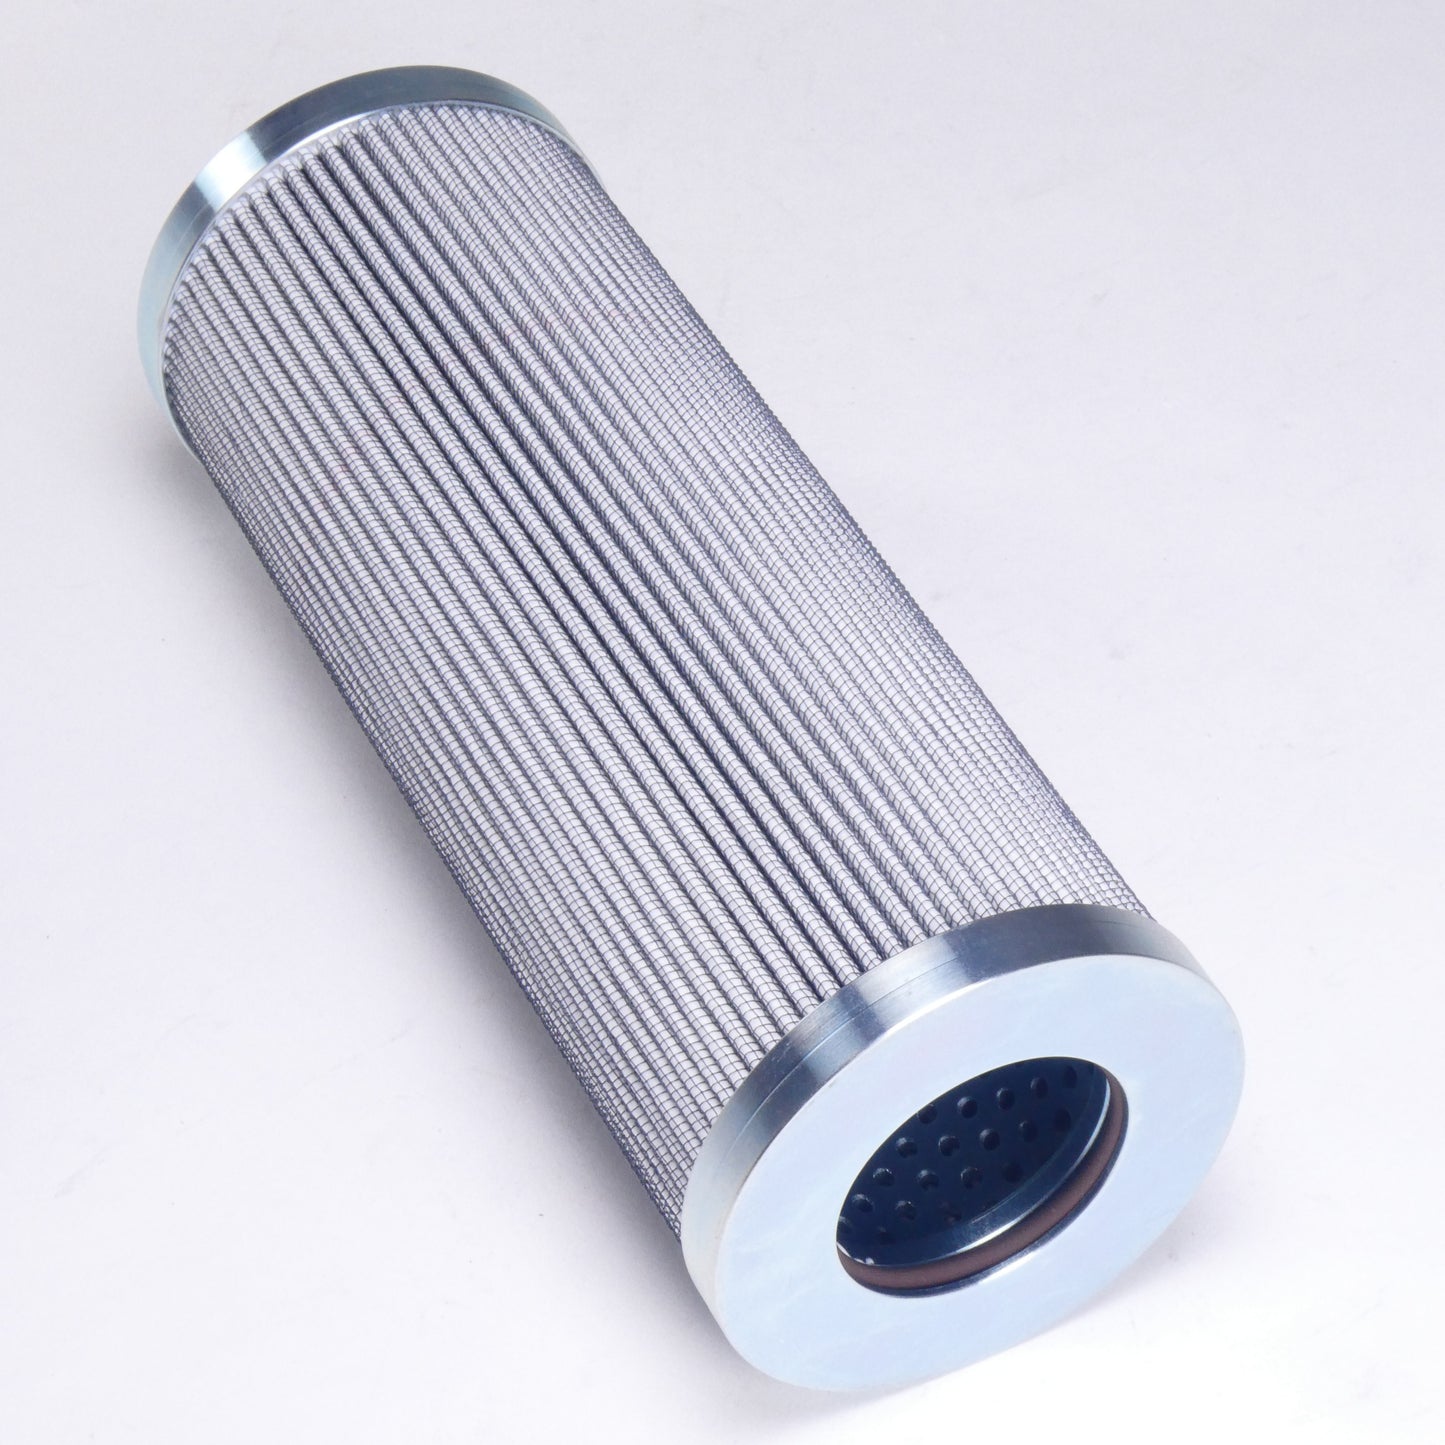 Hydrafil Replacement Filter Element for Commercial C928151